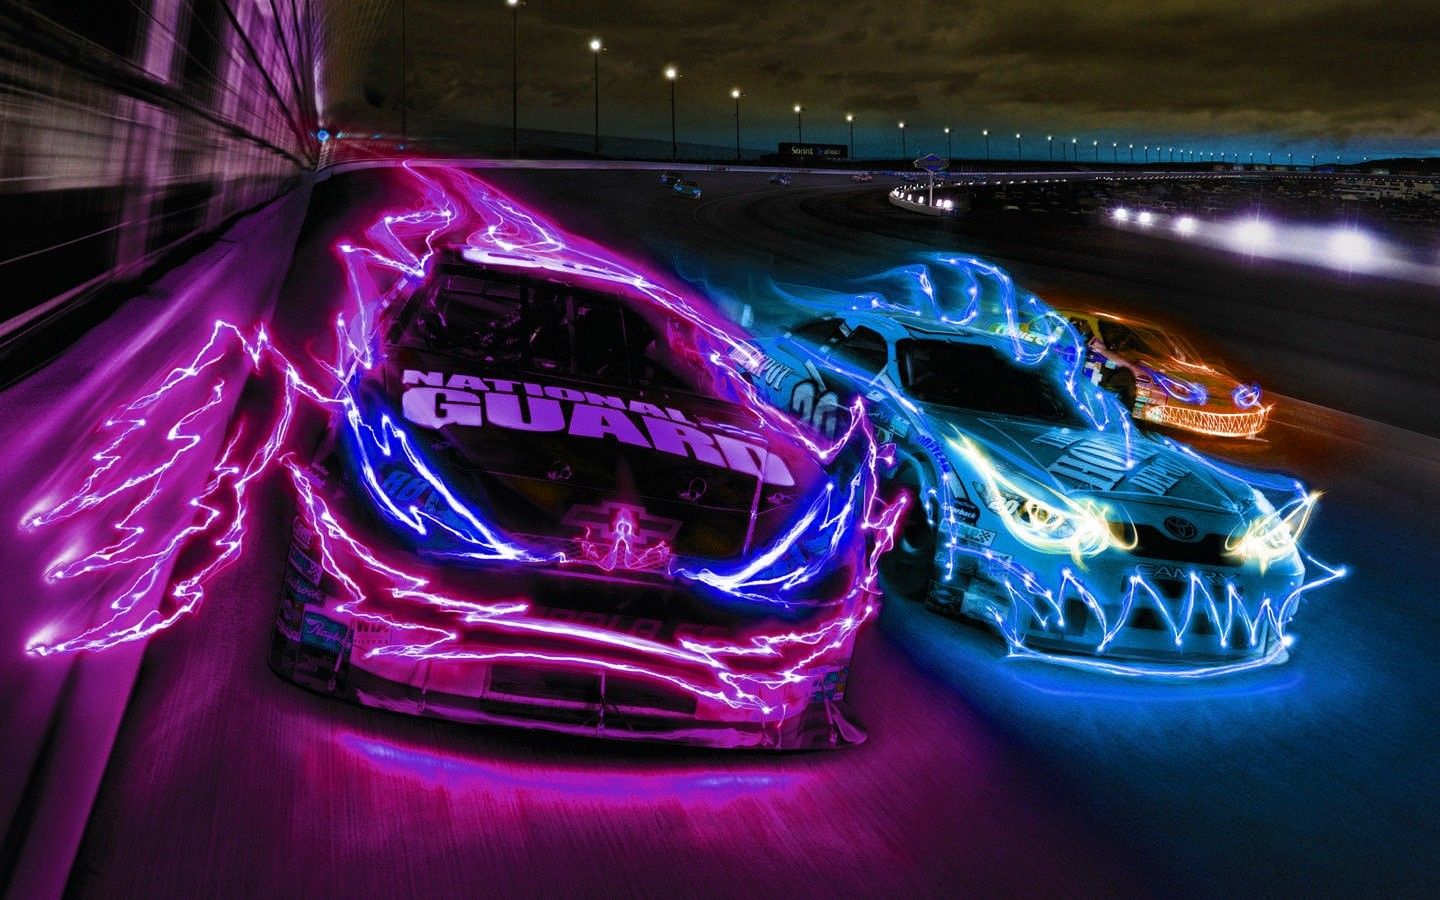 Cool Cars Wallpaper. Neon car, Super cars, Blue and purple